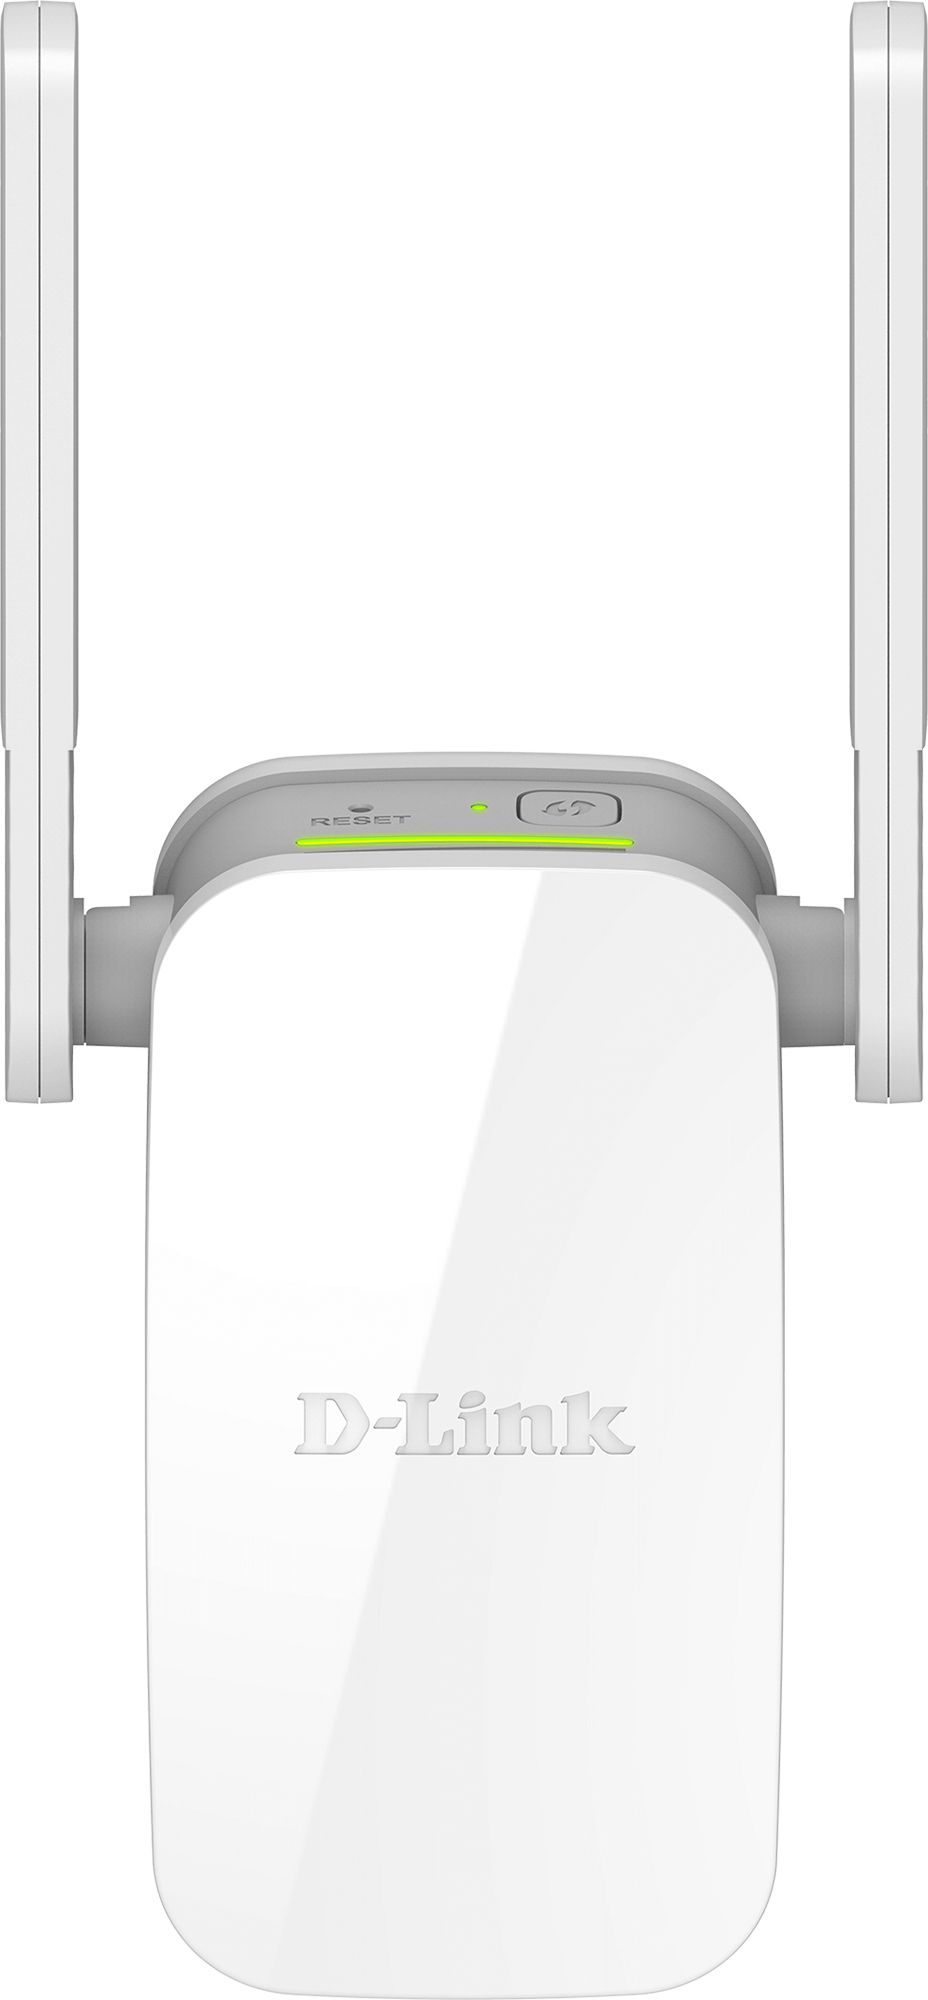 D-link Wireless AC1200 Dual Band Range Extender DAP-1610, with FE port; Compact Wall Plug design; External antenna design; 2x2 11ac Technology, Up to 1200 Mbps data rate; Complying with the IEEE 802.11 ac draft, a, n, g, and b; WPS (WiFi Protected Setup); WPA2/WPA wireless encryption; D-Link_3